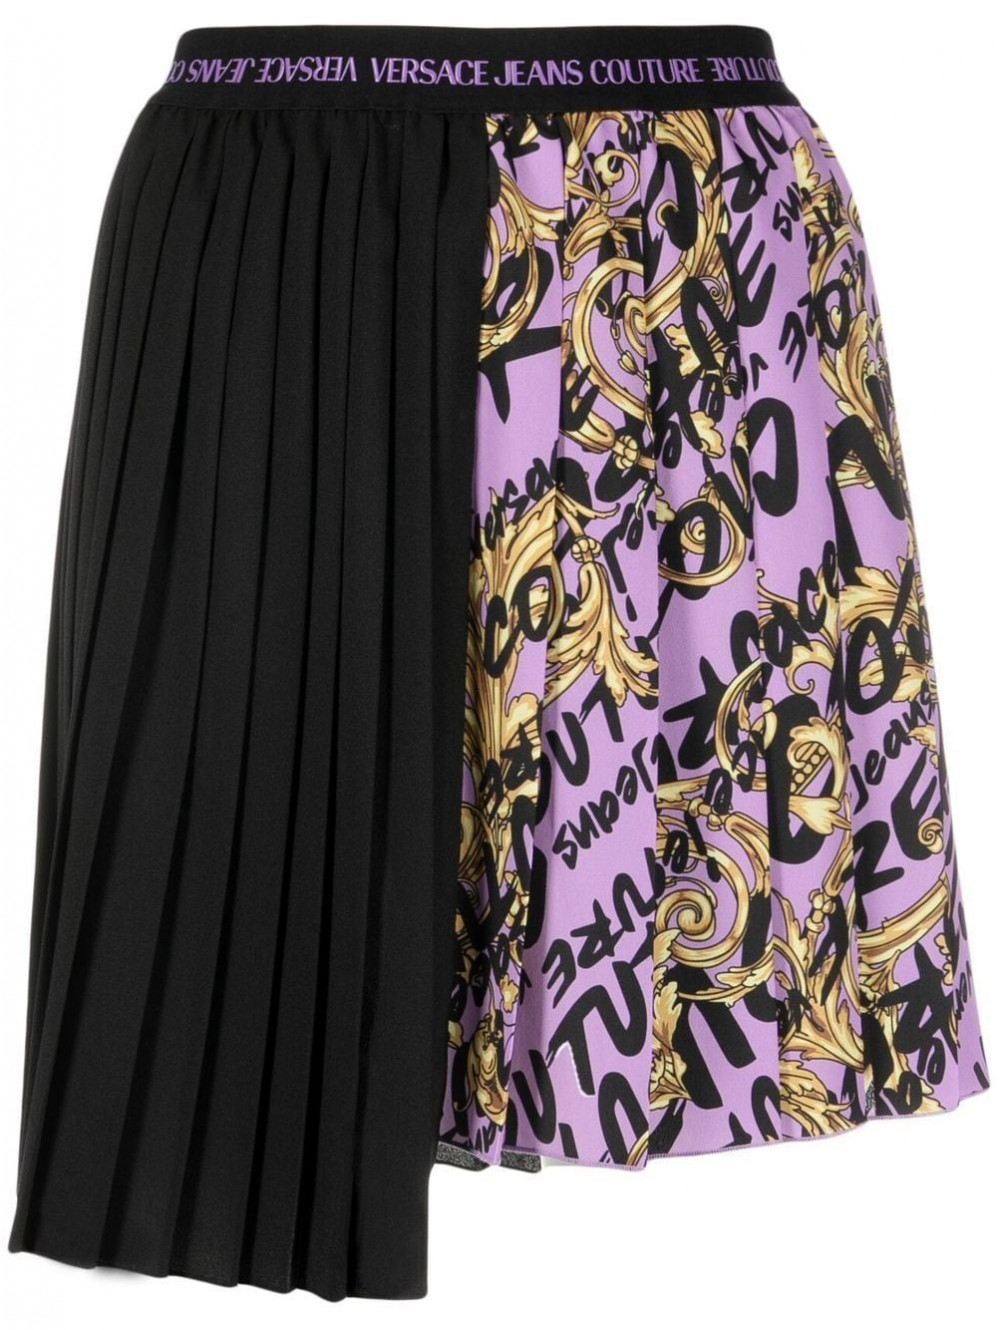 Re-styling skirt crepe